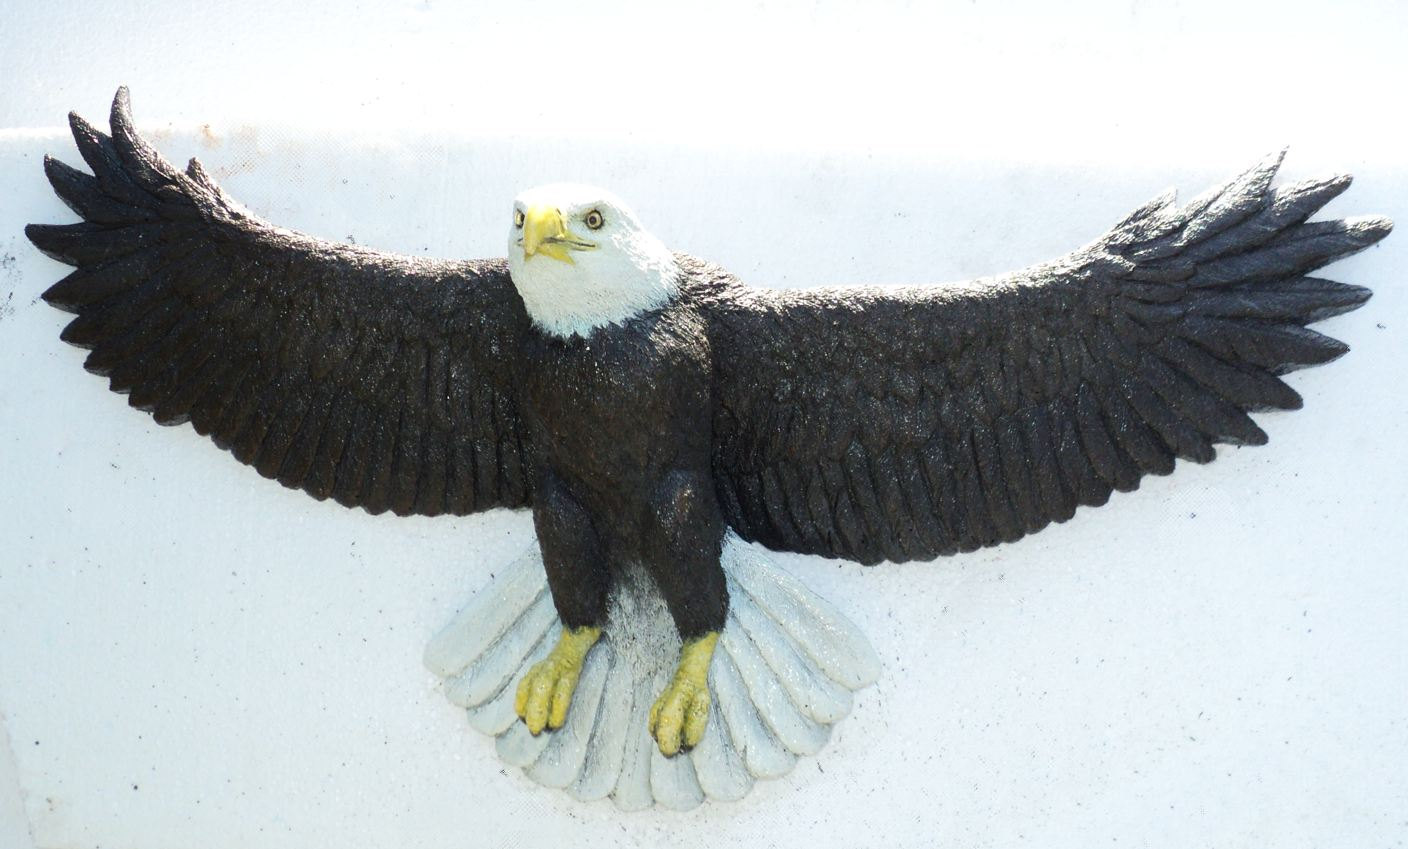 Primary image for Victory, Soaring Eagle 27 x 11 x 7 in. Ltd. ed.